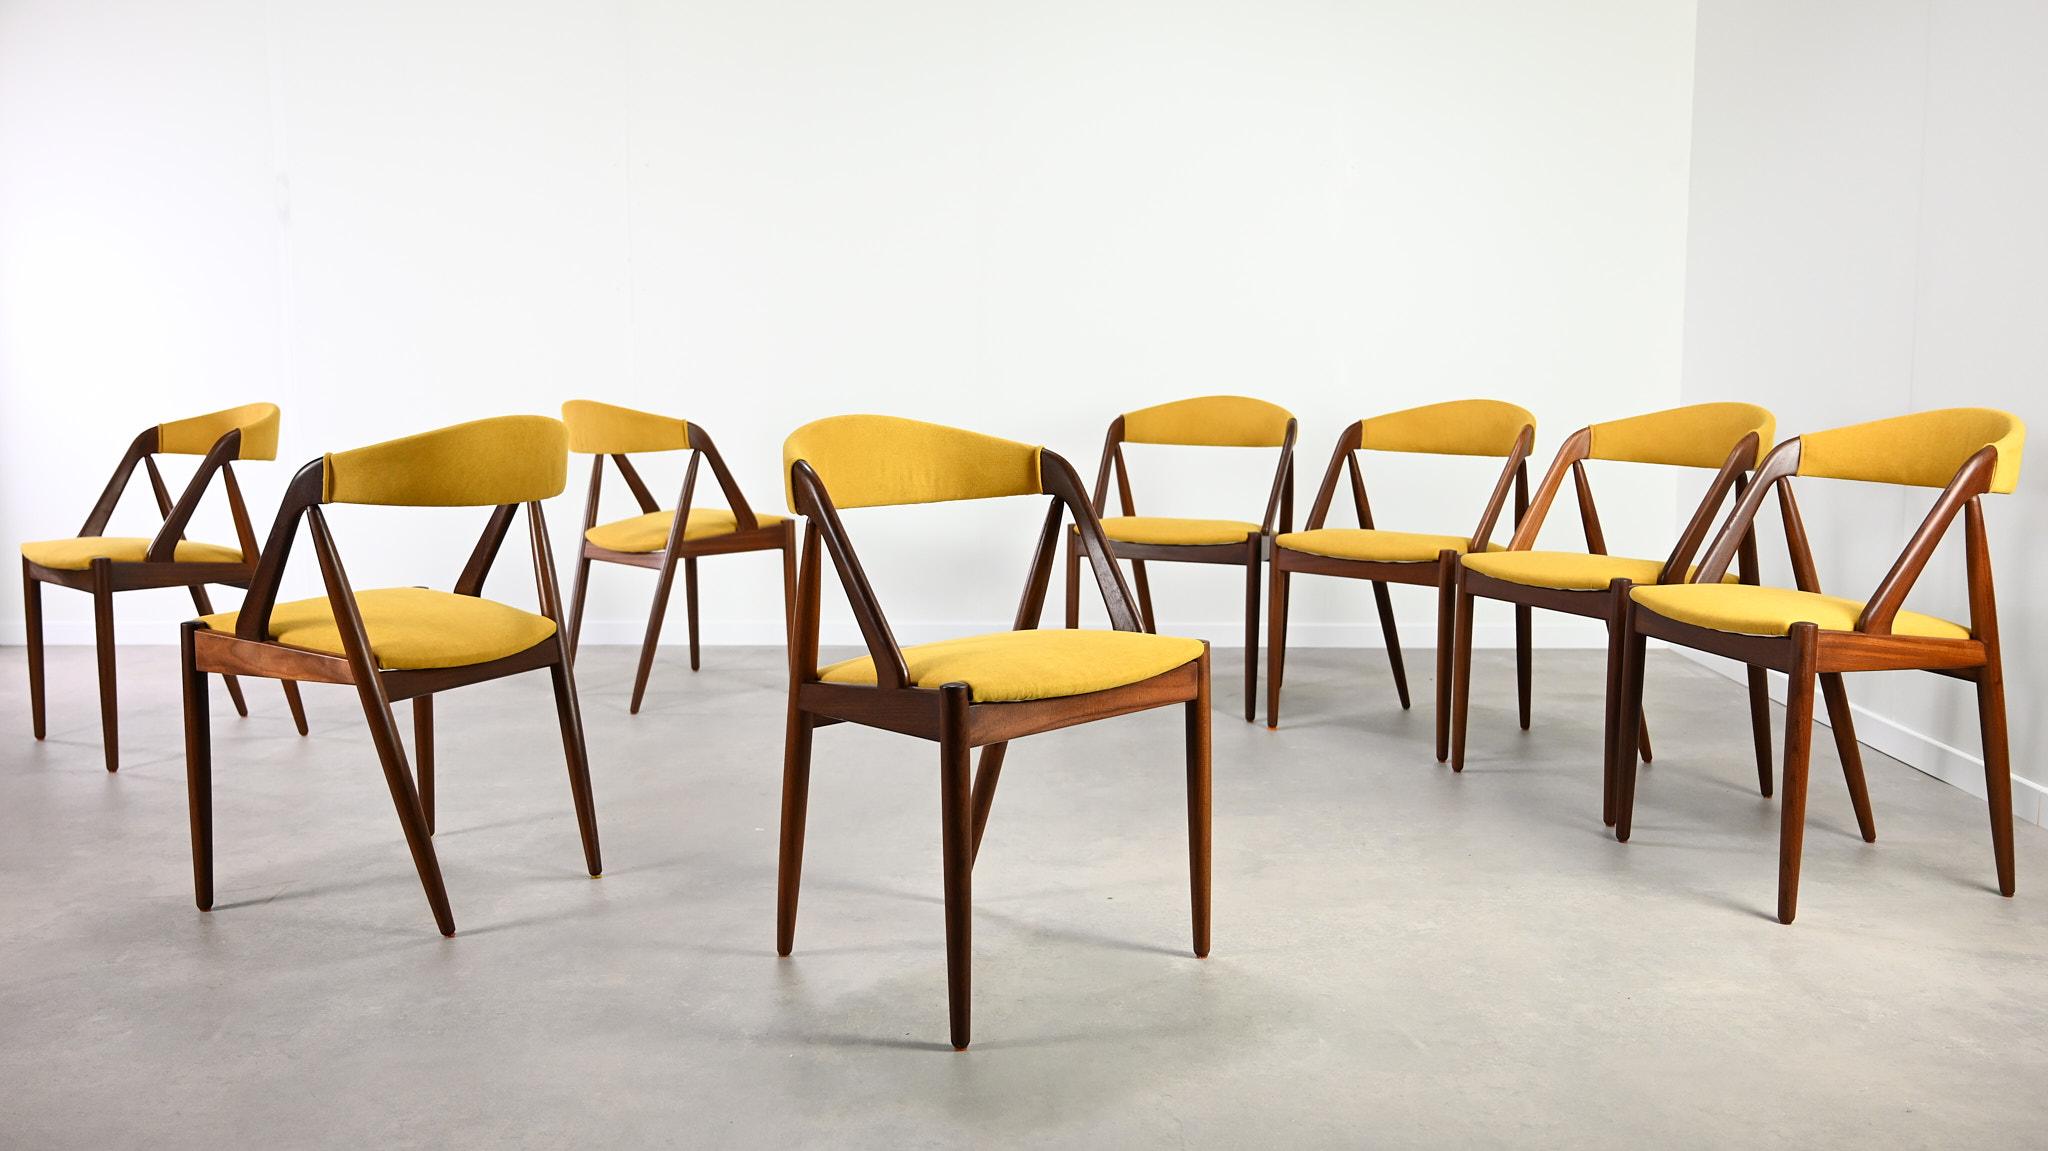 Set of 8 chairs, model 31, by Kai Kristiansen for Schou Andersen. A beautiful example of Danish design from the sixties. Structures made of solid teak, seats and backrests reupholstered in yellow fabric. Small traces of use on the teak, excellent